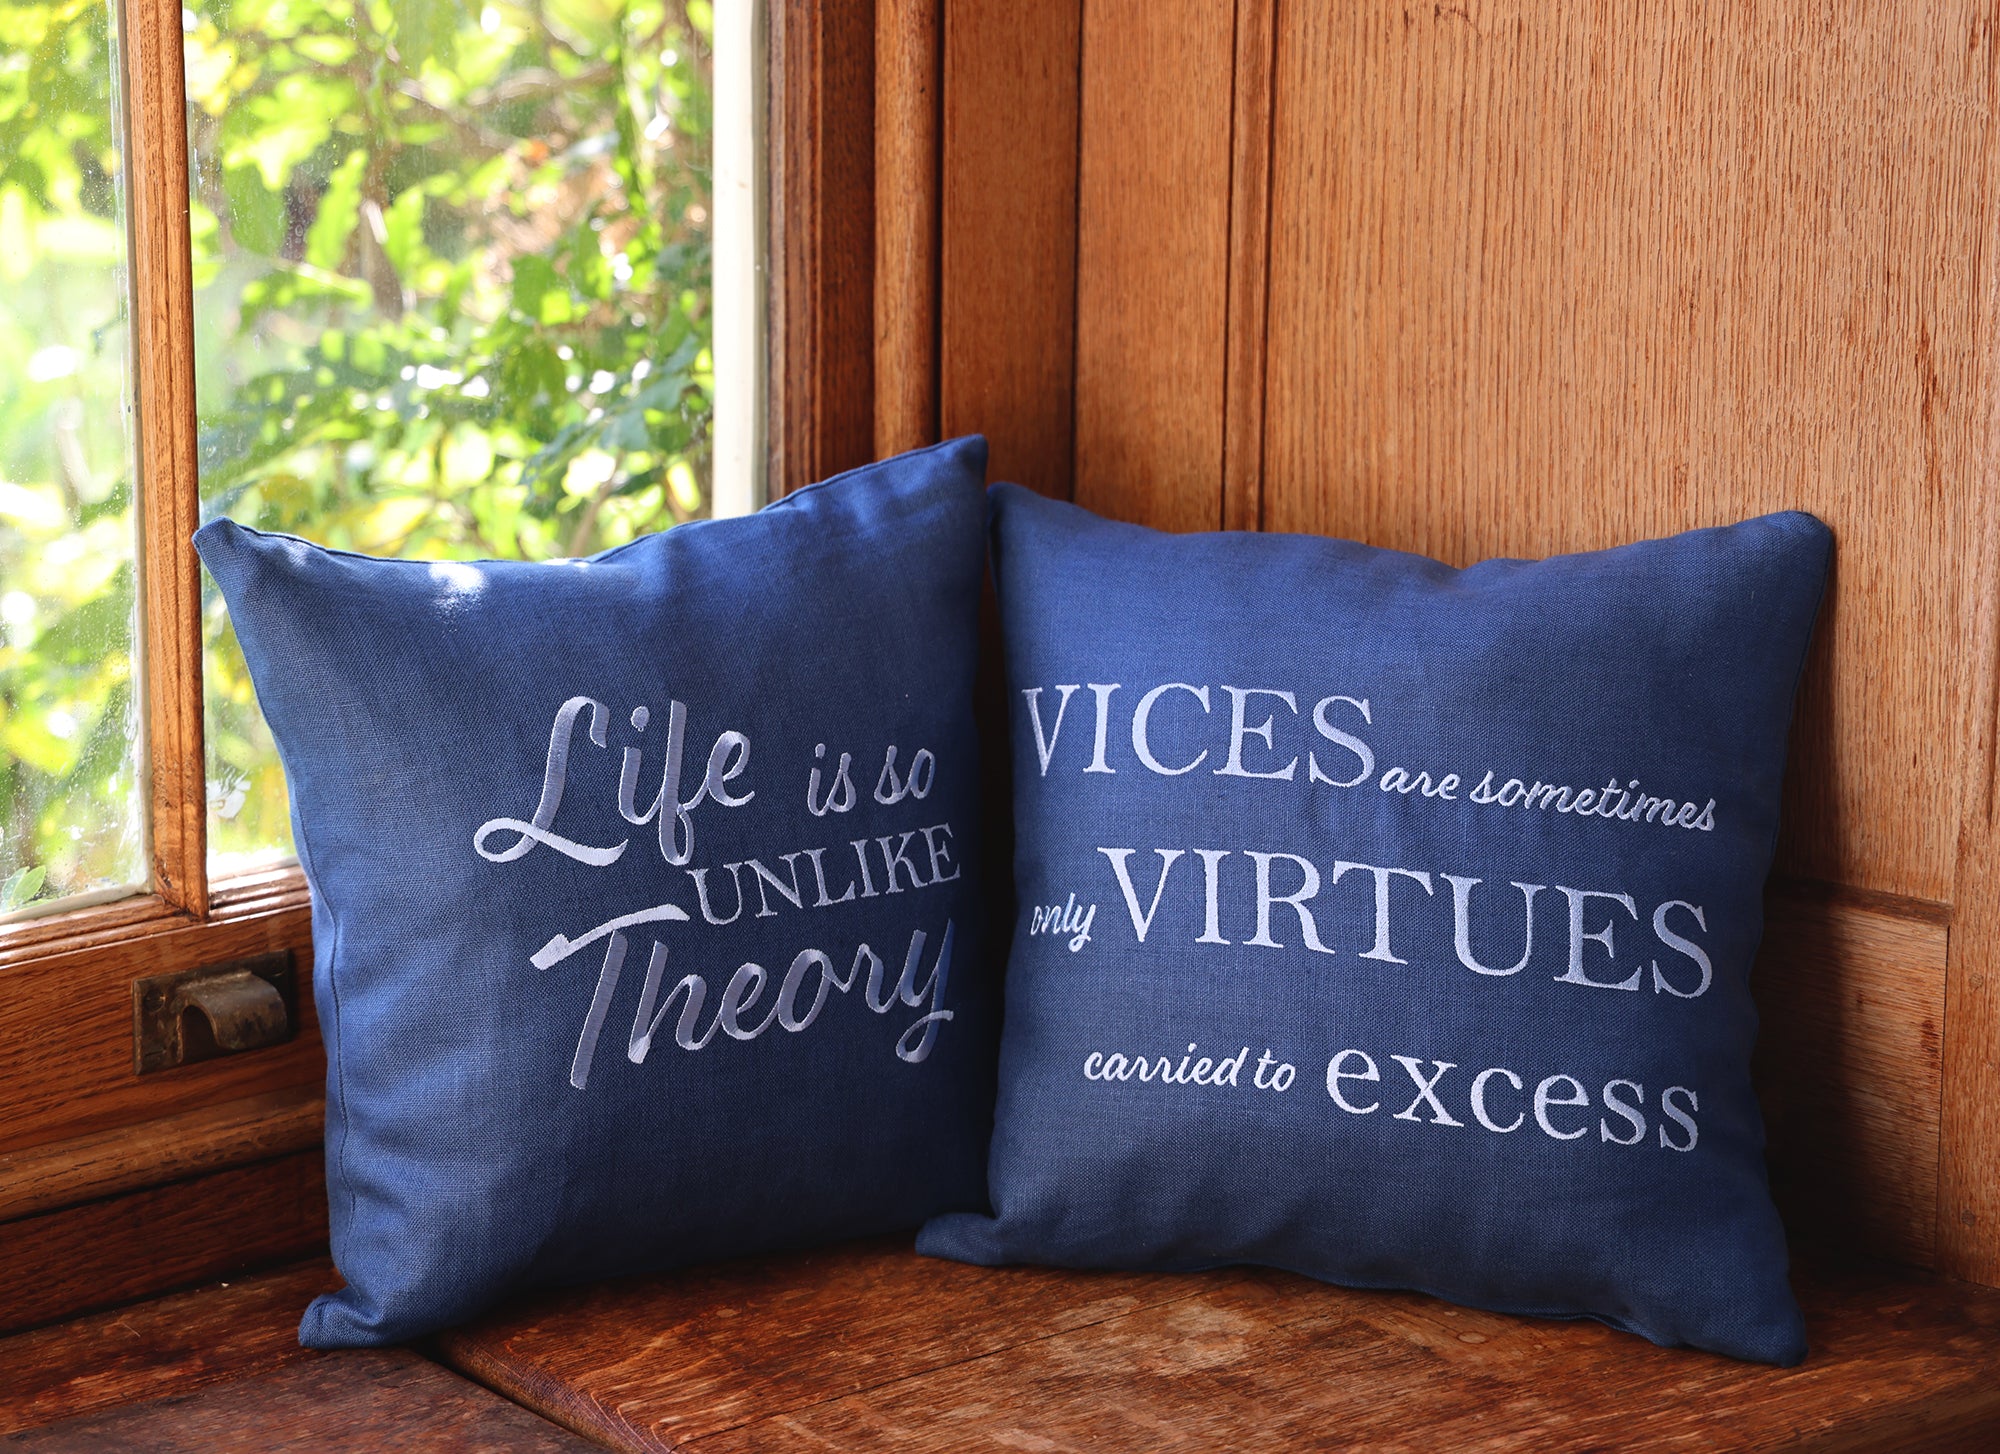 Quote cushions